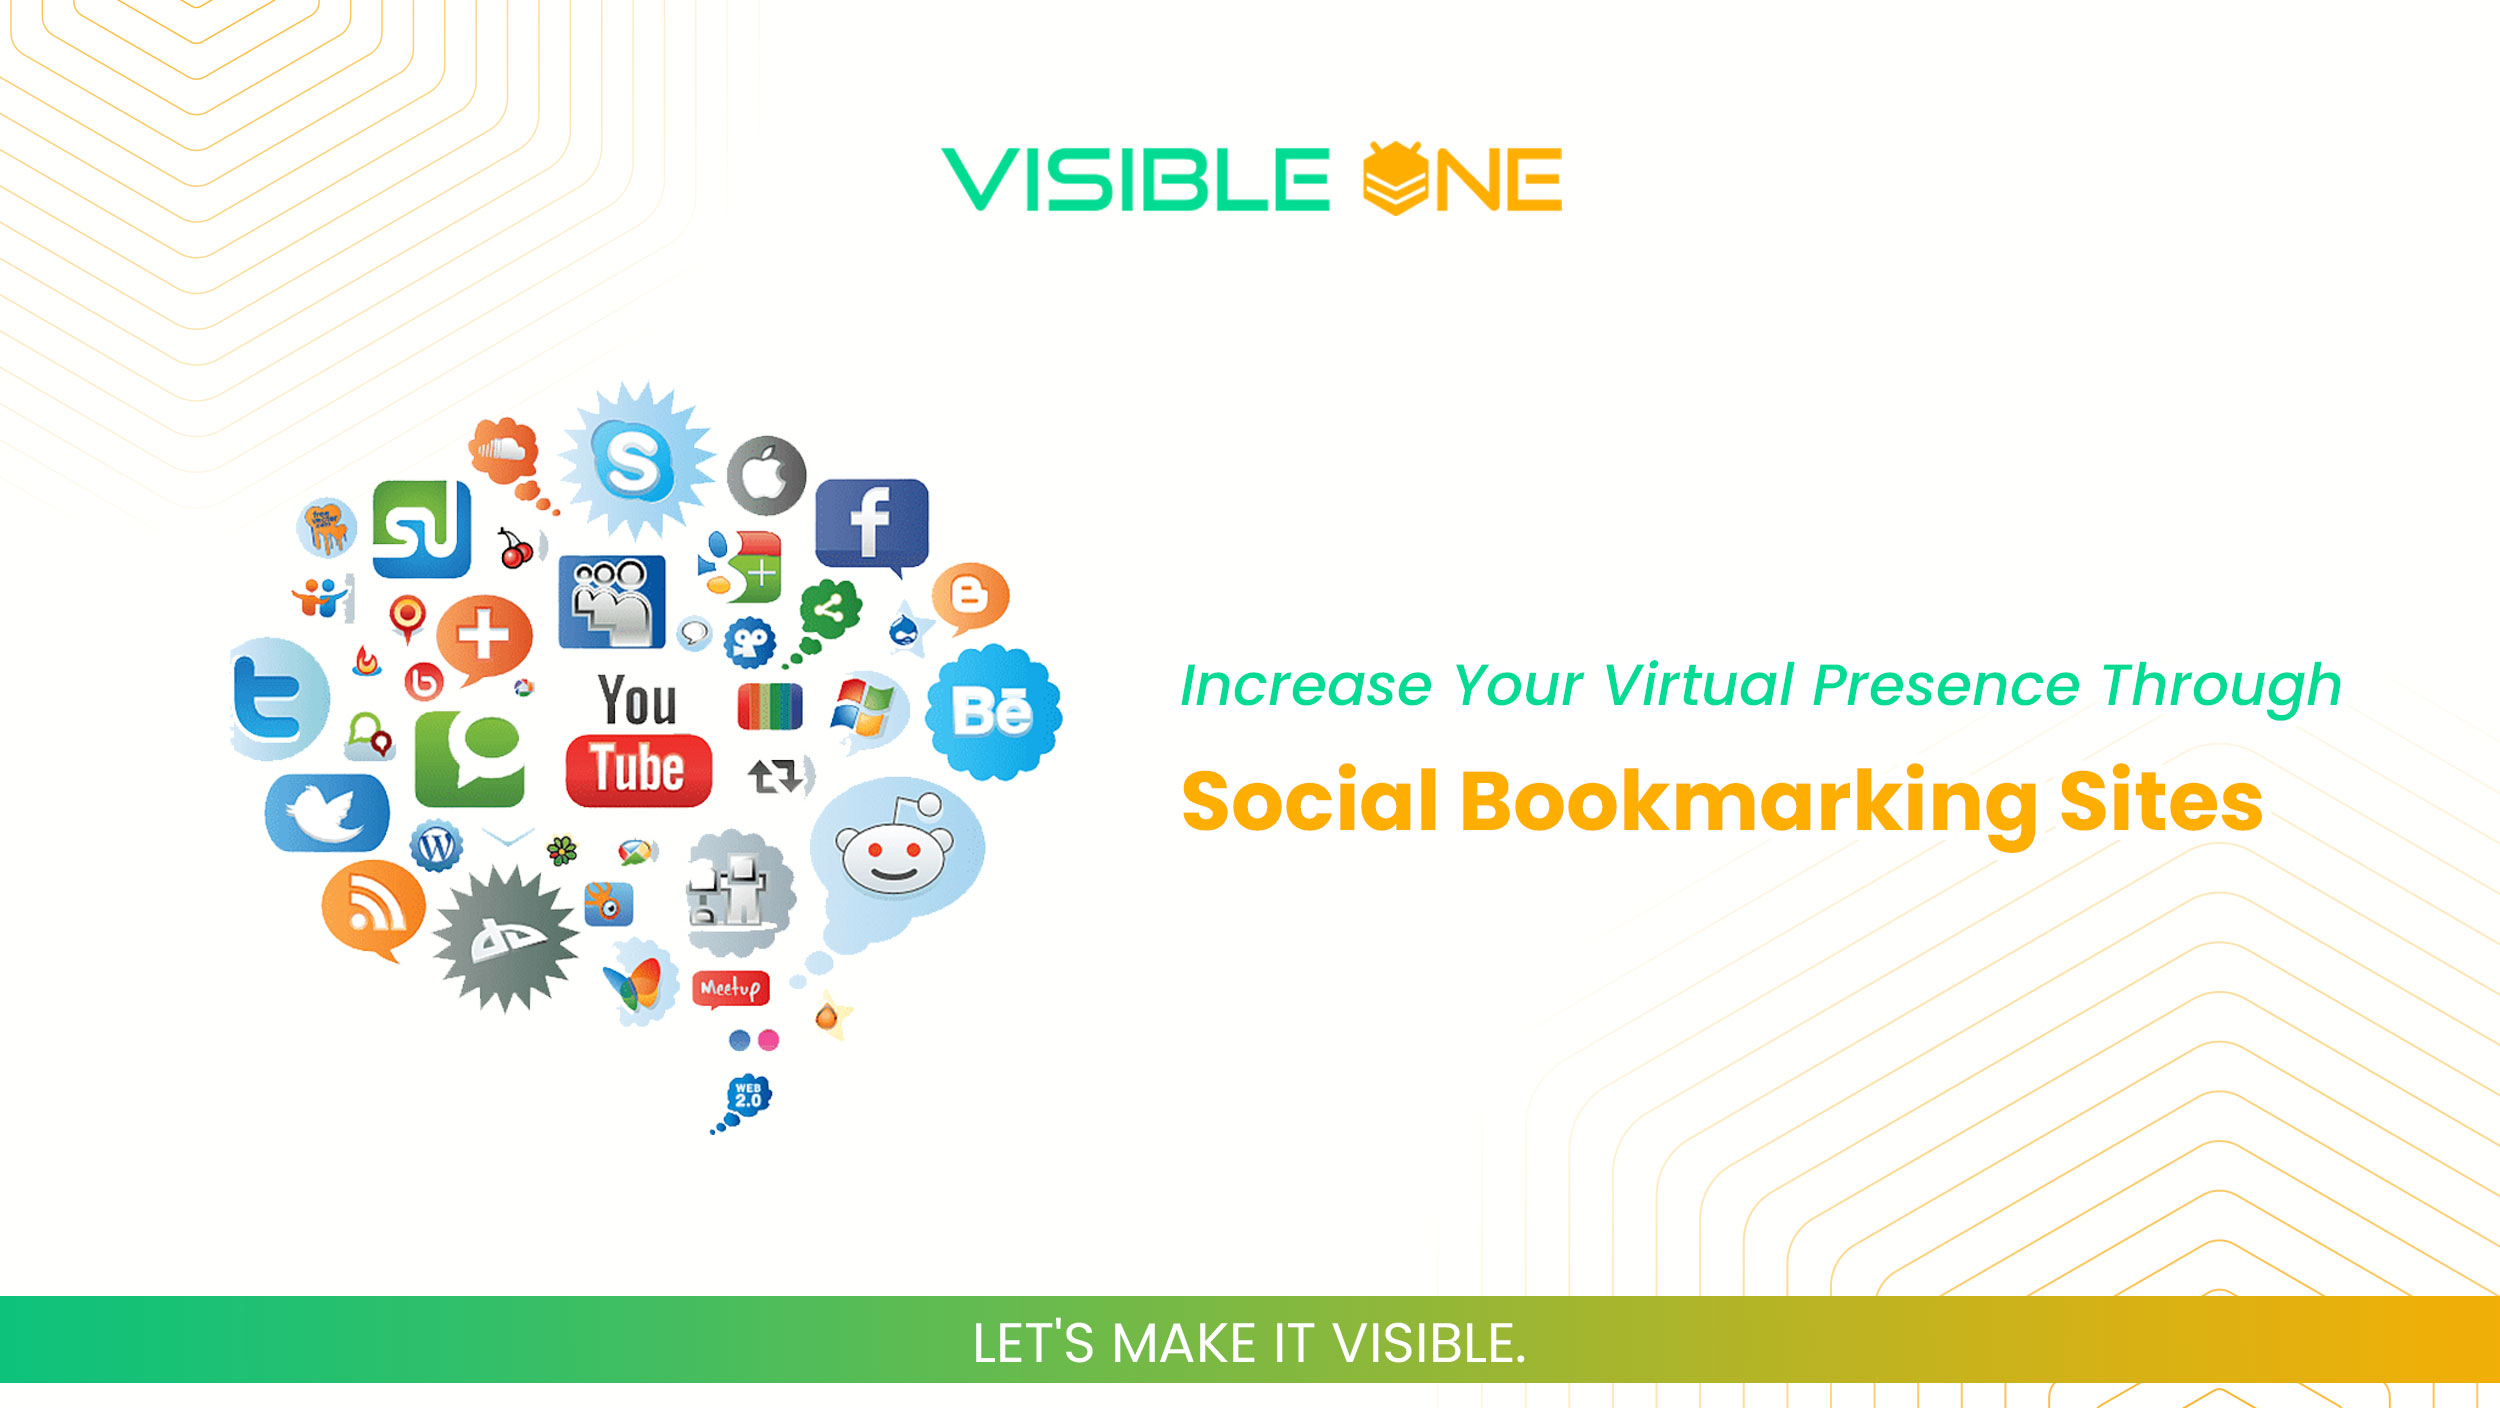 social bookmarking sites vector, yellow and green background, visible one